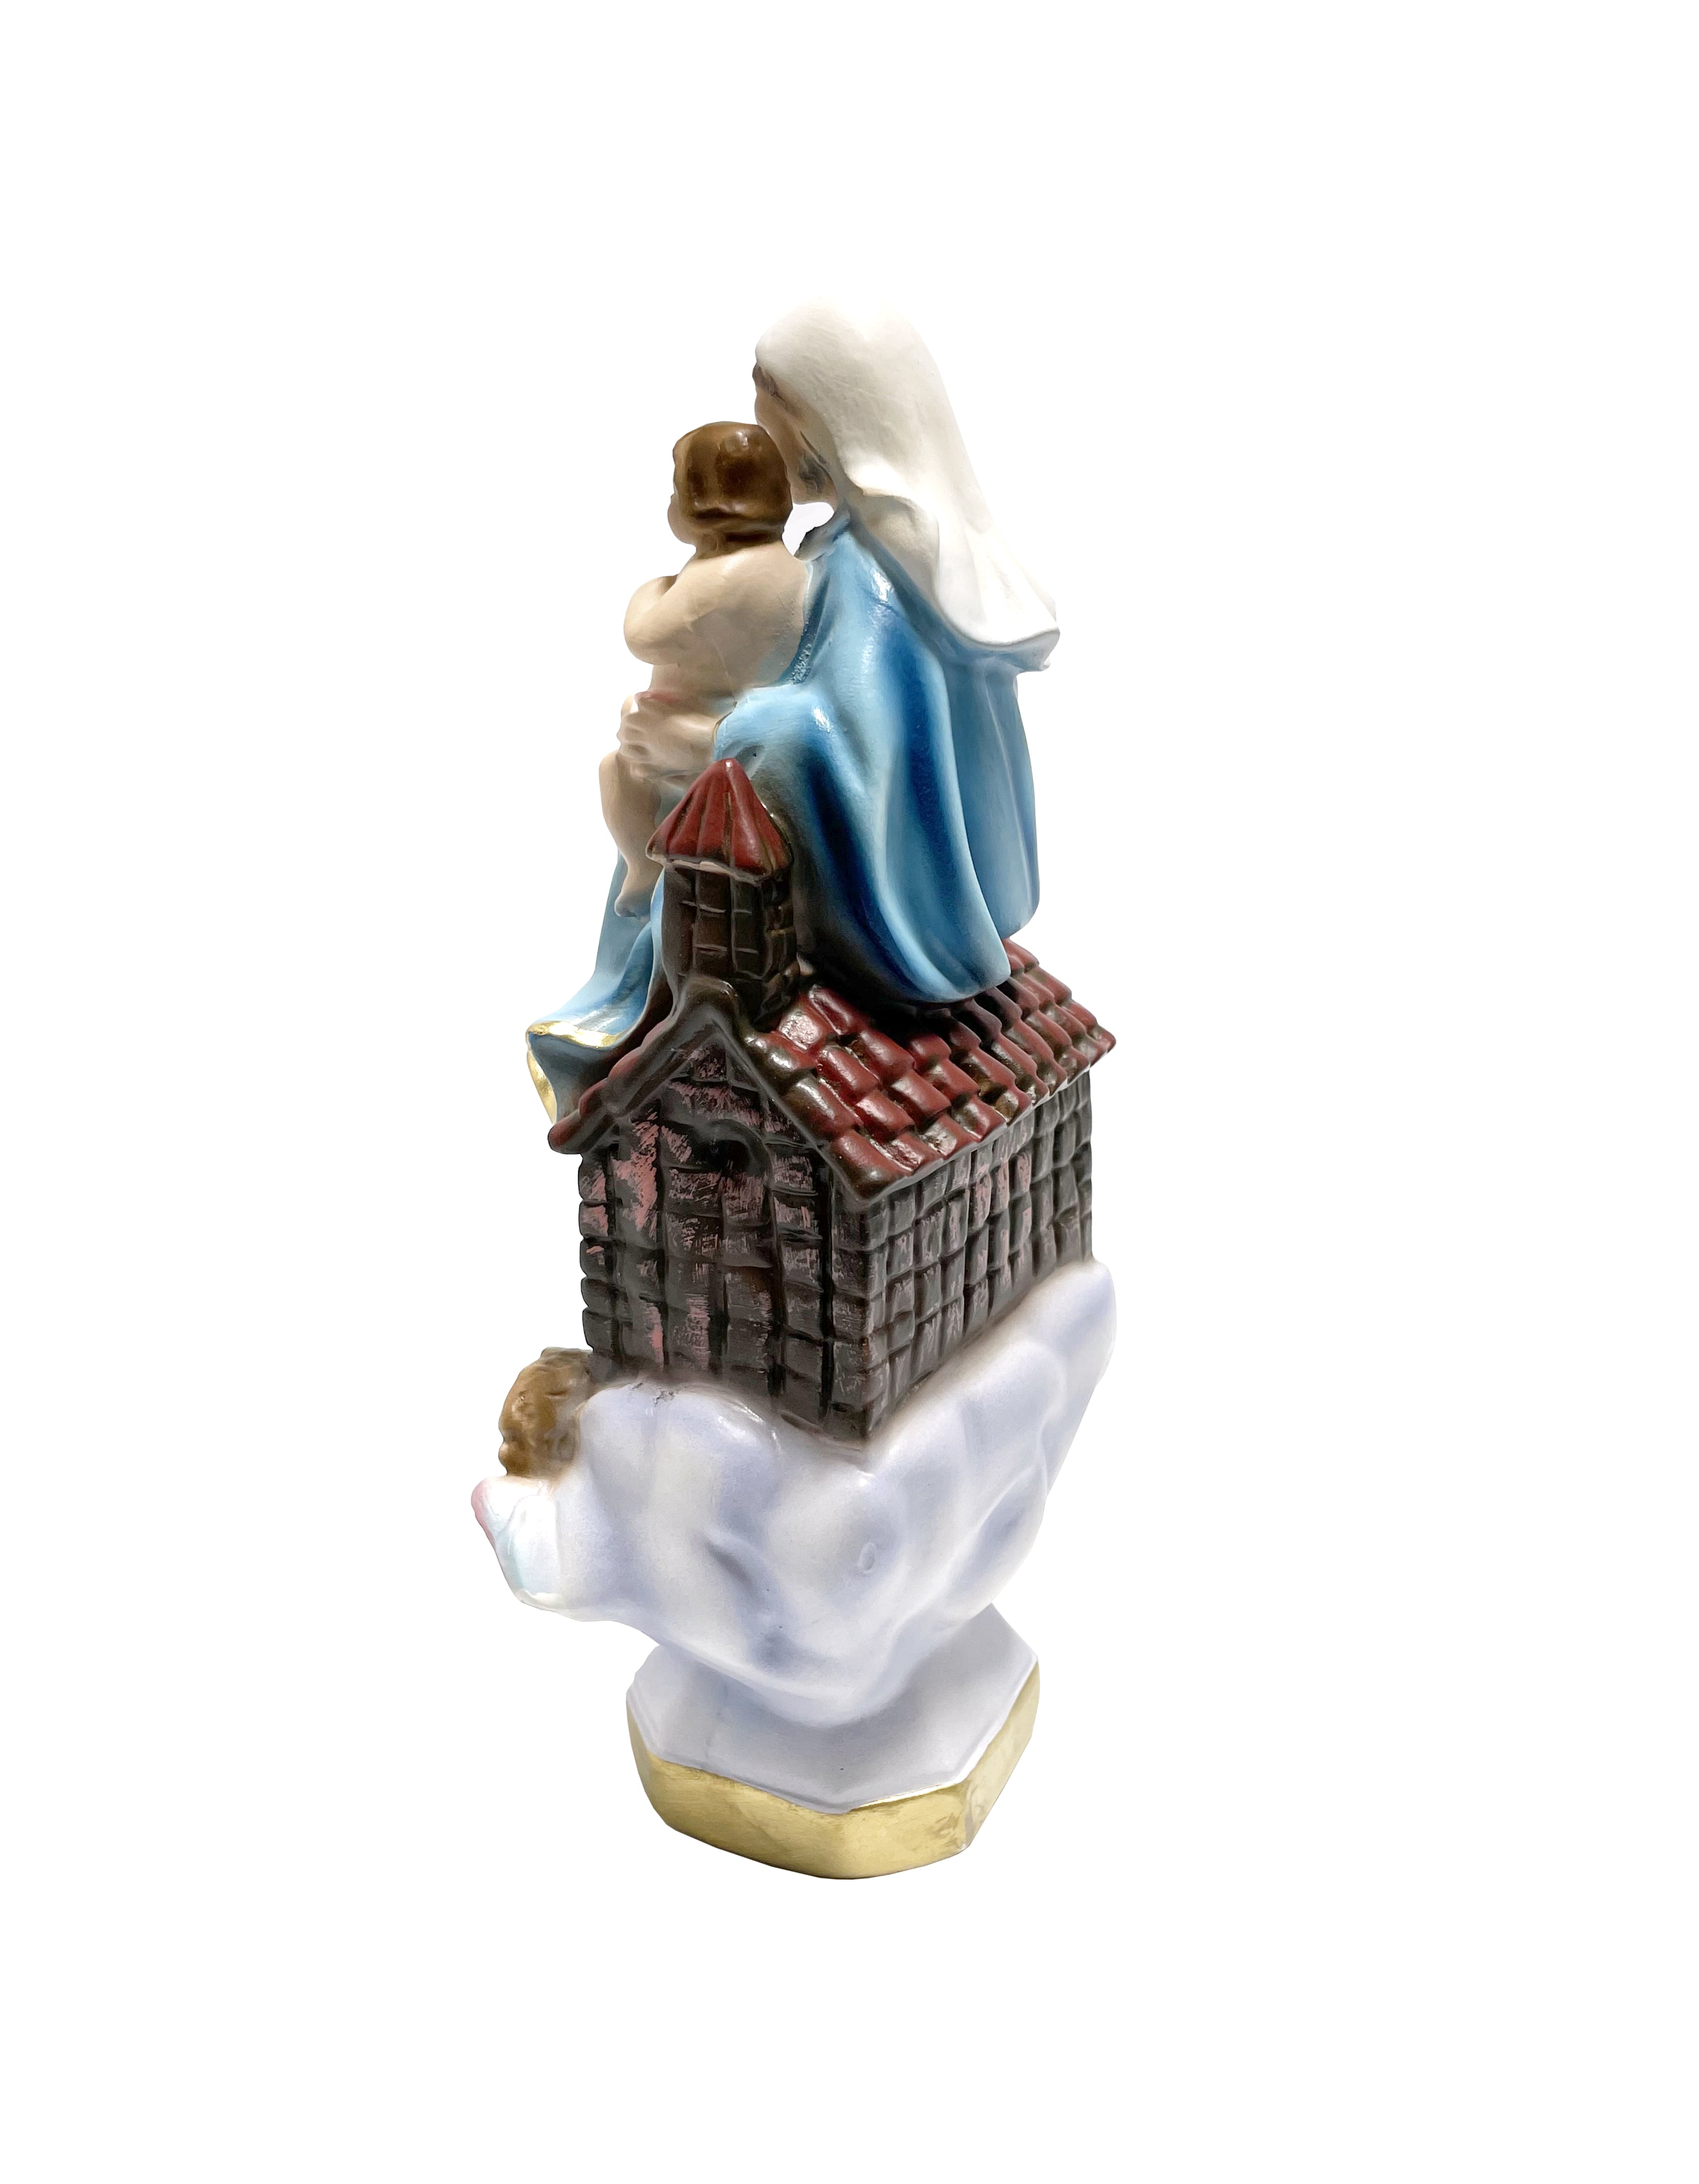 Religious statue of Our Lady of Loreto 9" height